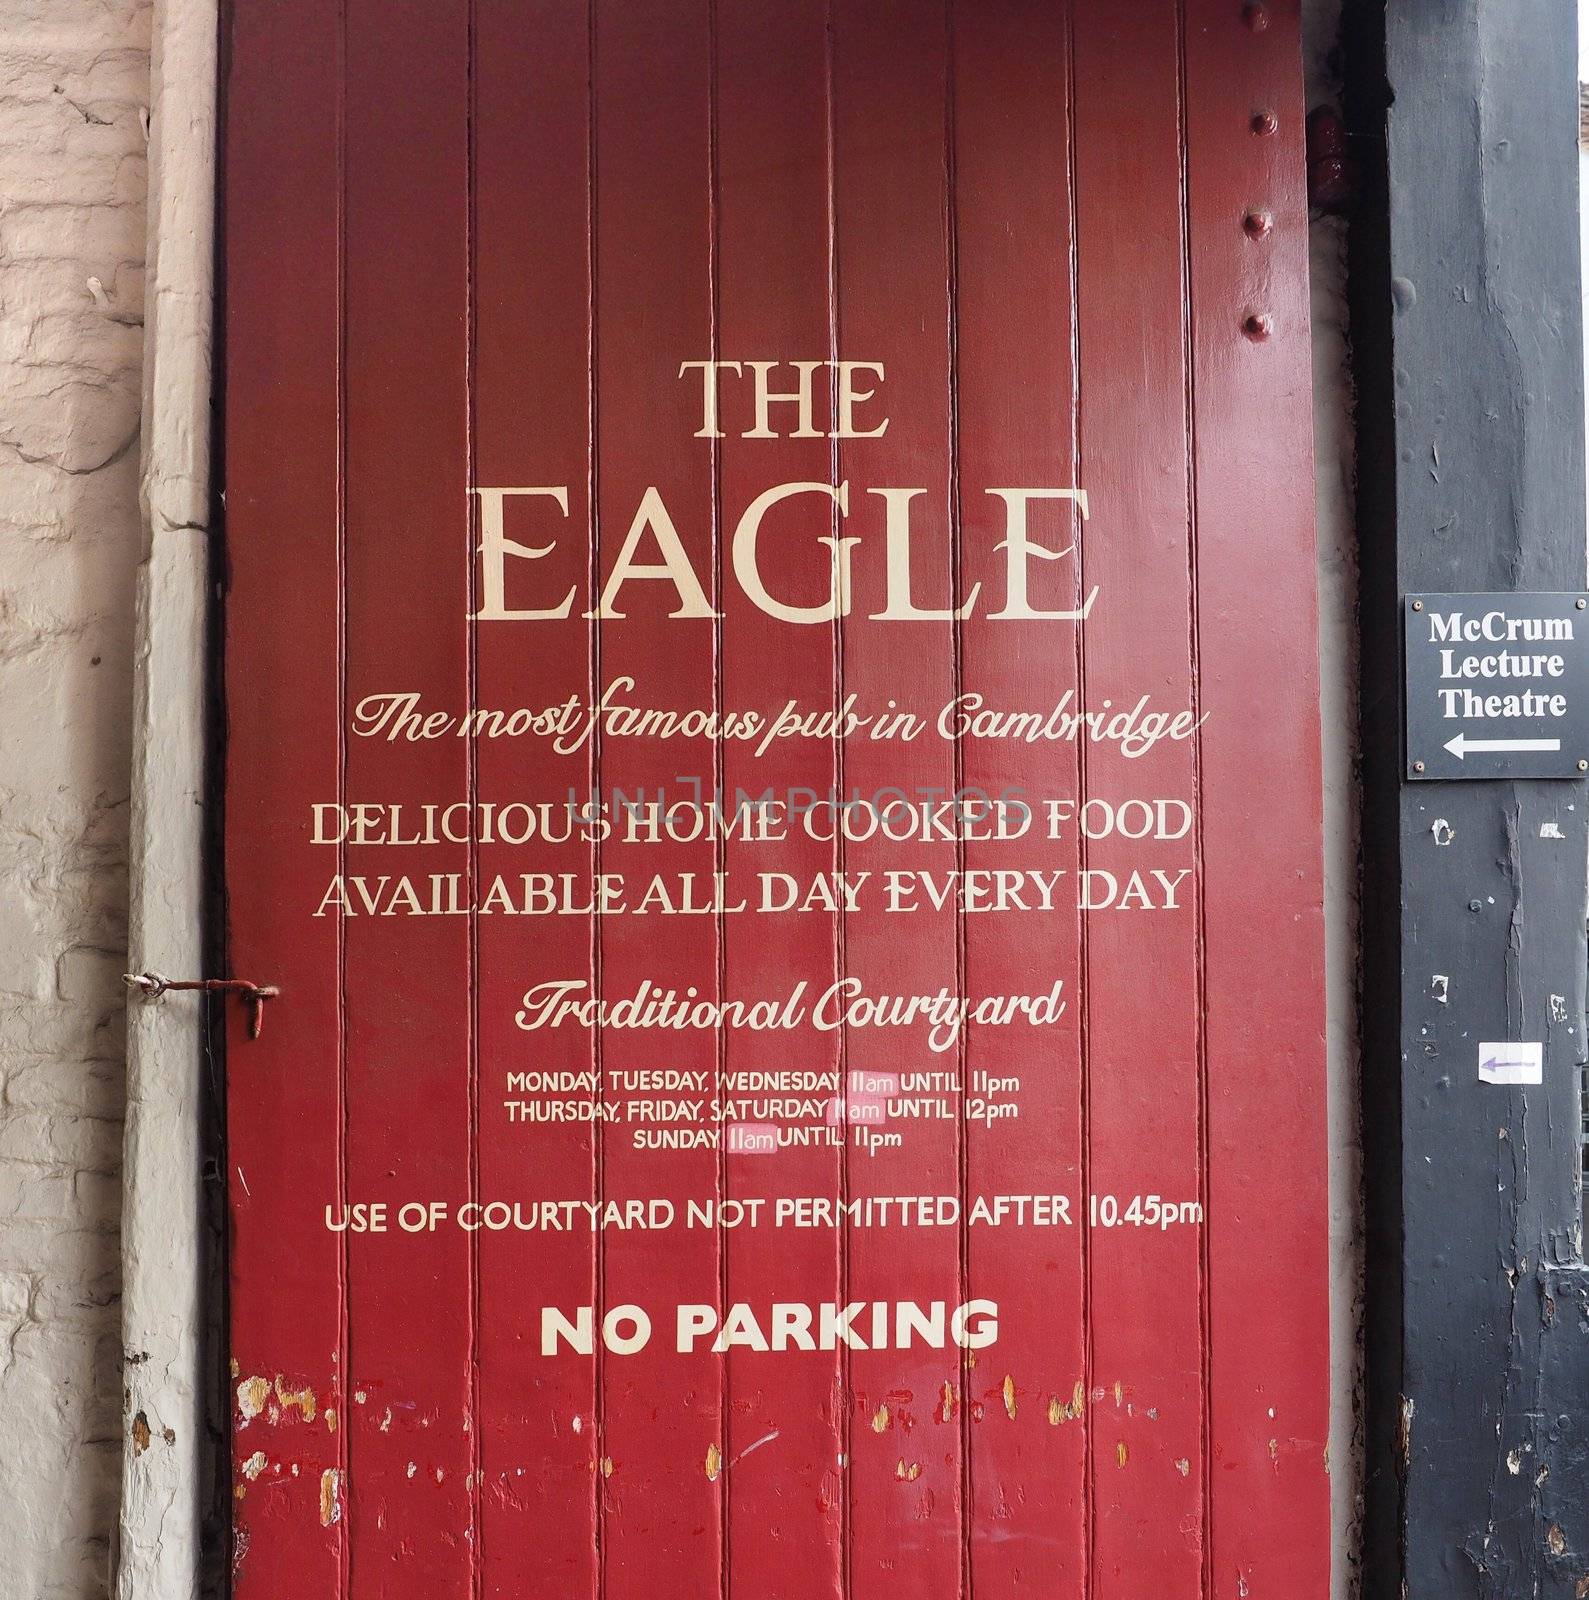 CAMBRIDGE, UK - CIRCA OCTOBER 2018: The Eagle Pub where DNA discovery was announced in 1953 by scientists of the Cavendish Laboratory